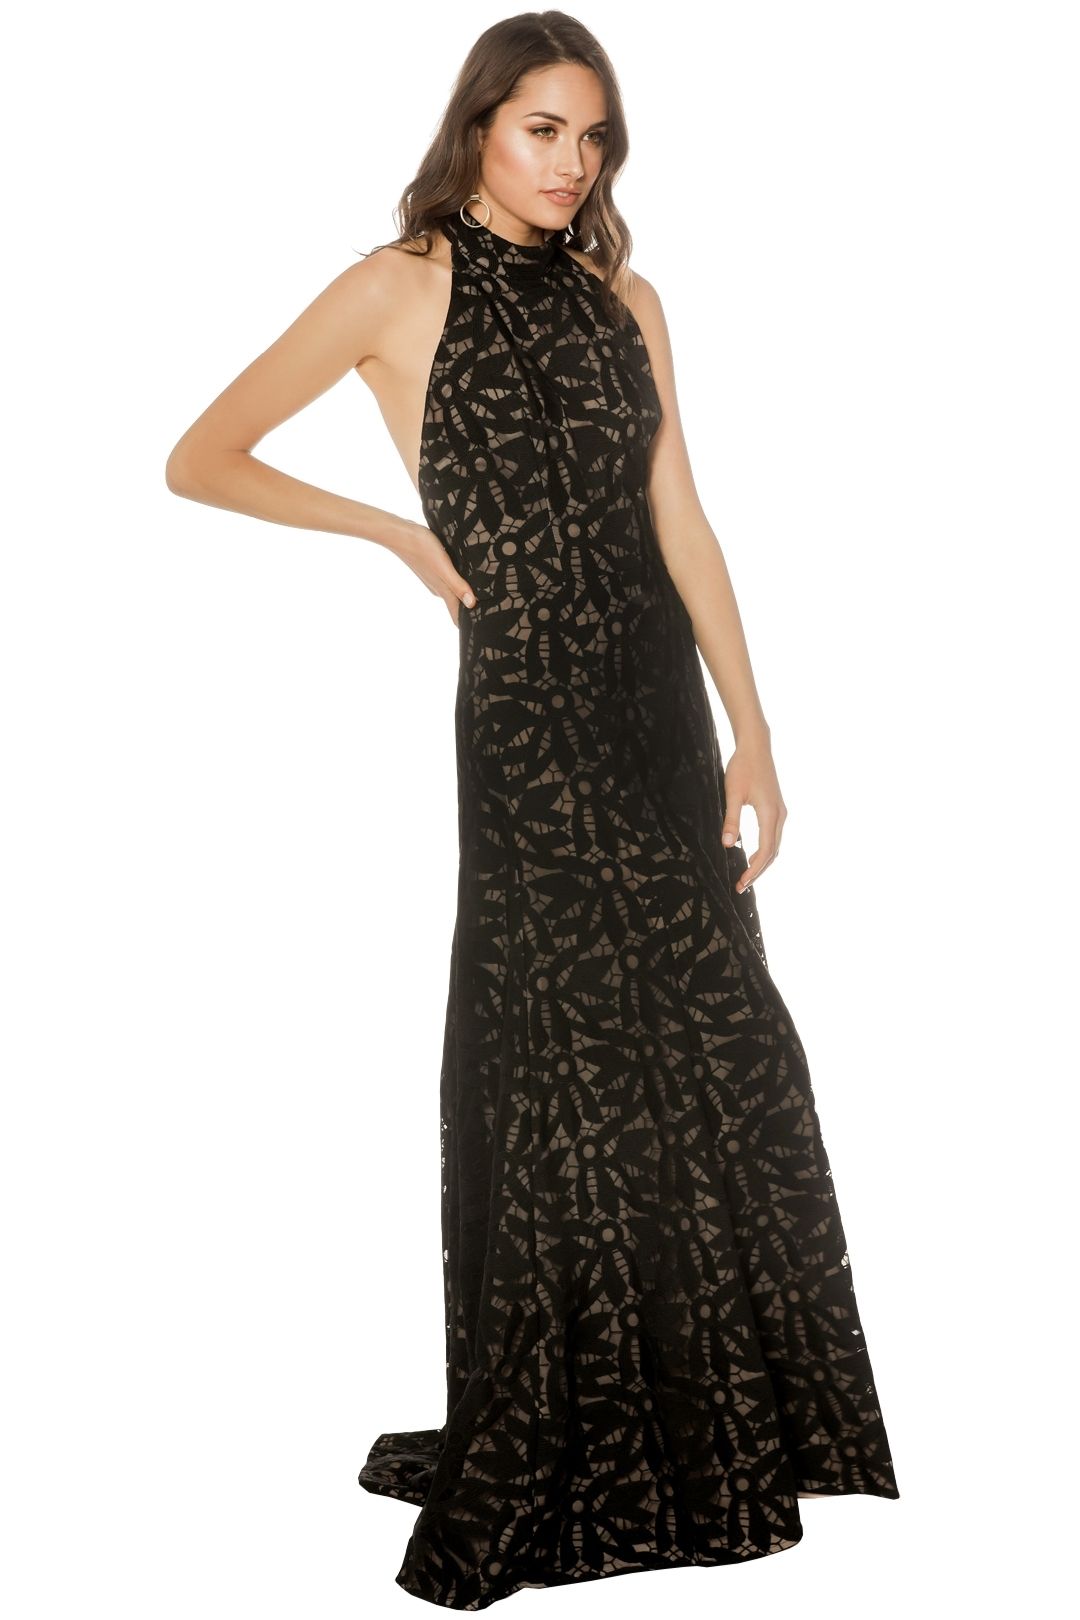 Cooper St - Lady of Venice High Neck Gown - Black - Side